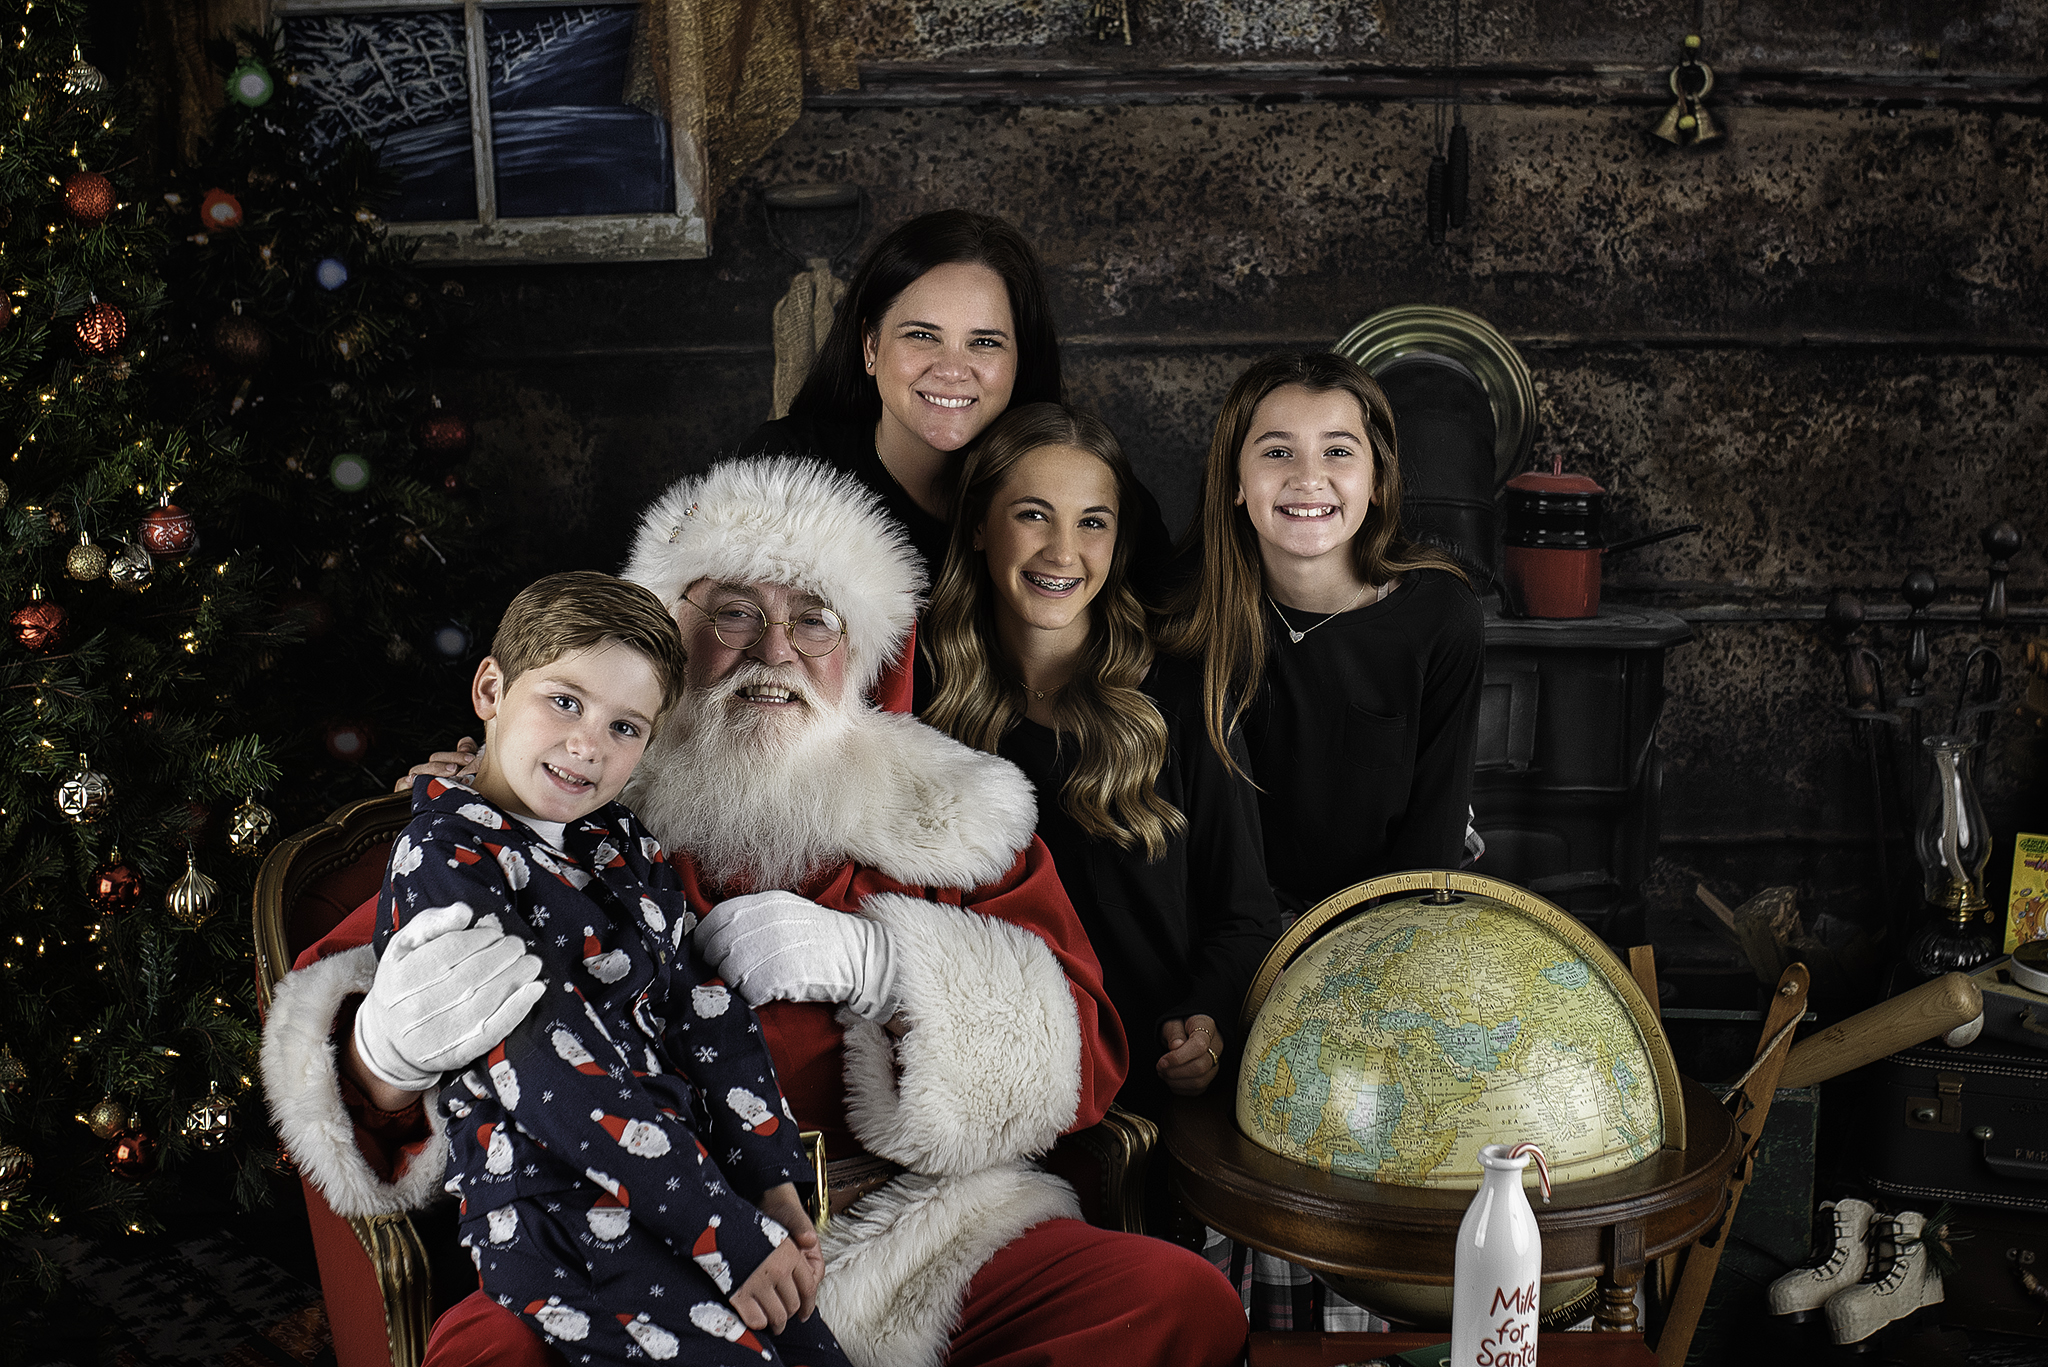 Shannon Reece Jones photography and family in studio with Santa